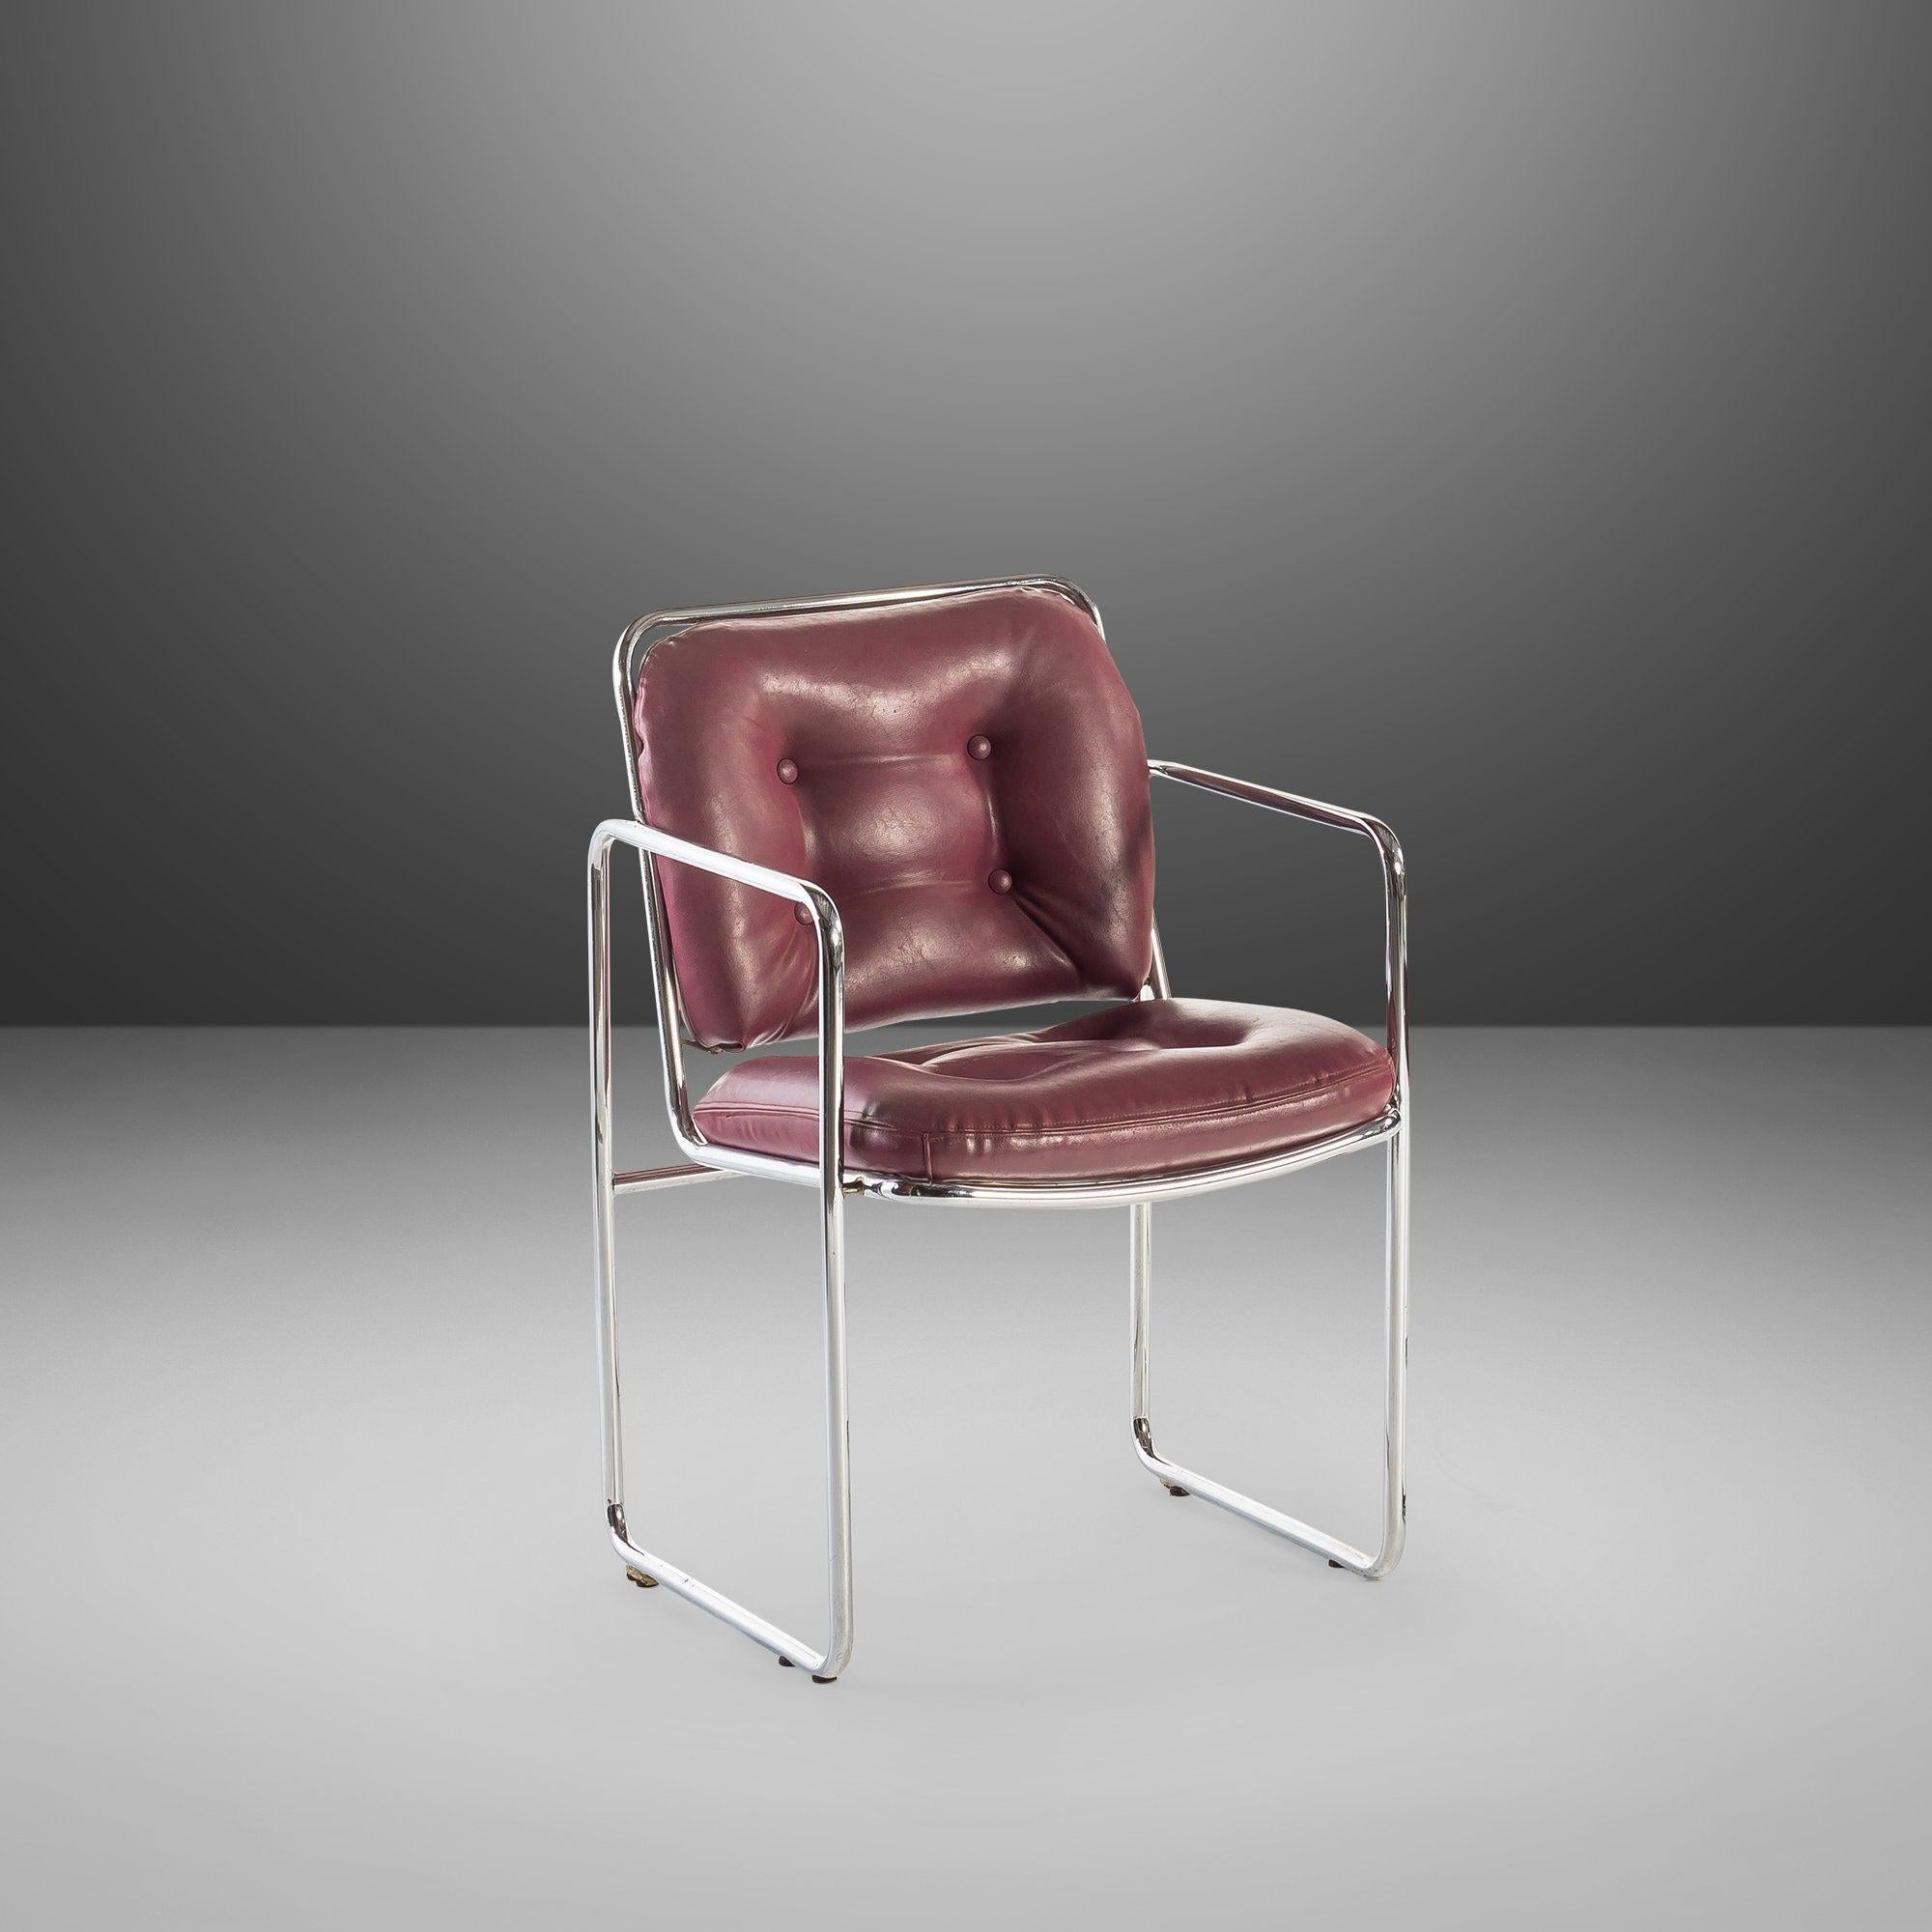 American MCM Tubular Chrome Lounge Chairs by Chromcraft with Rich Oxblood Seats, c. 1960s For Sale